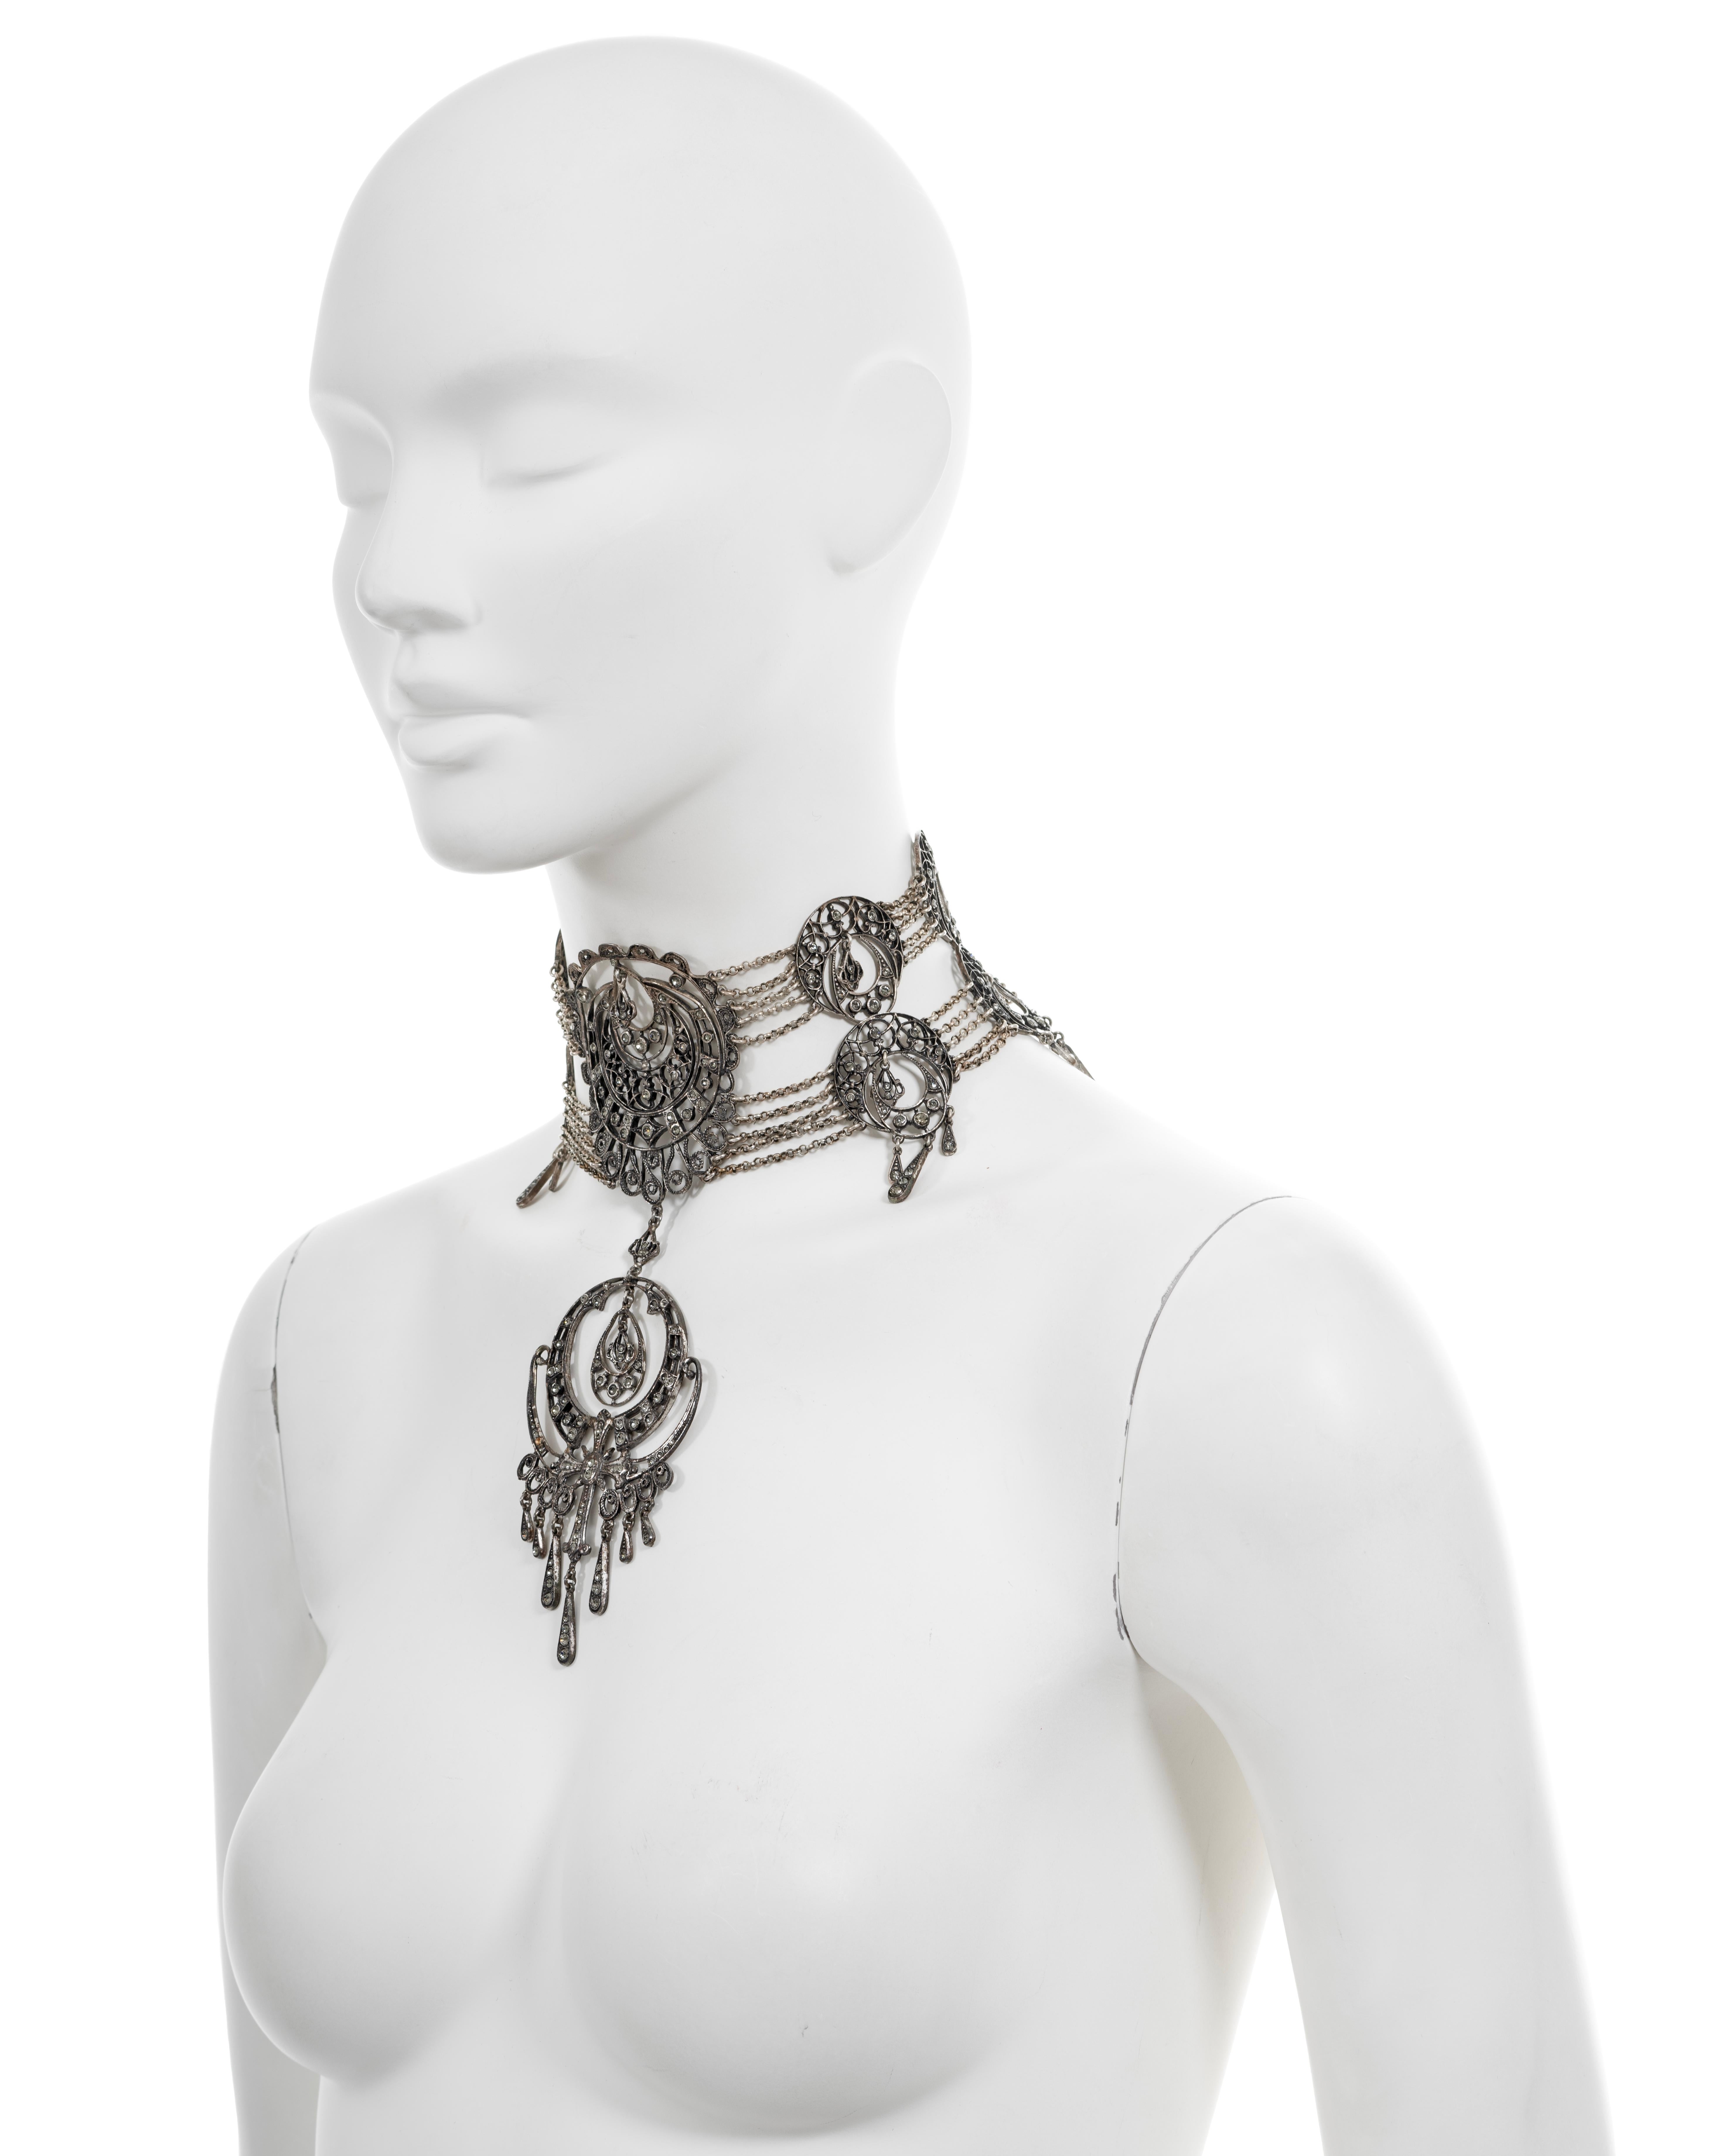 Christian Dior by John Galliano antique-style filigree choker necklace, ss 1999 For Sale 1